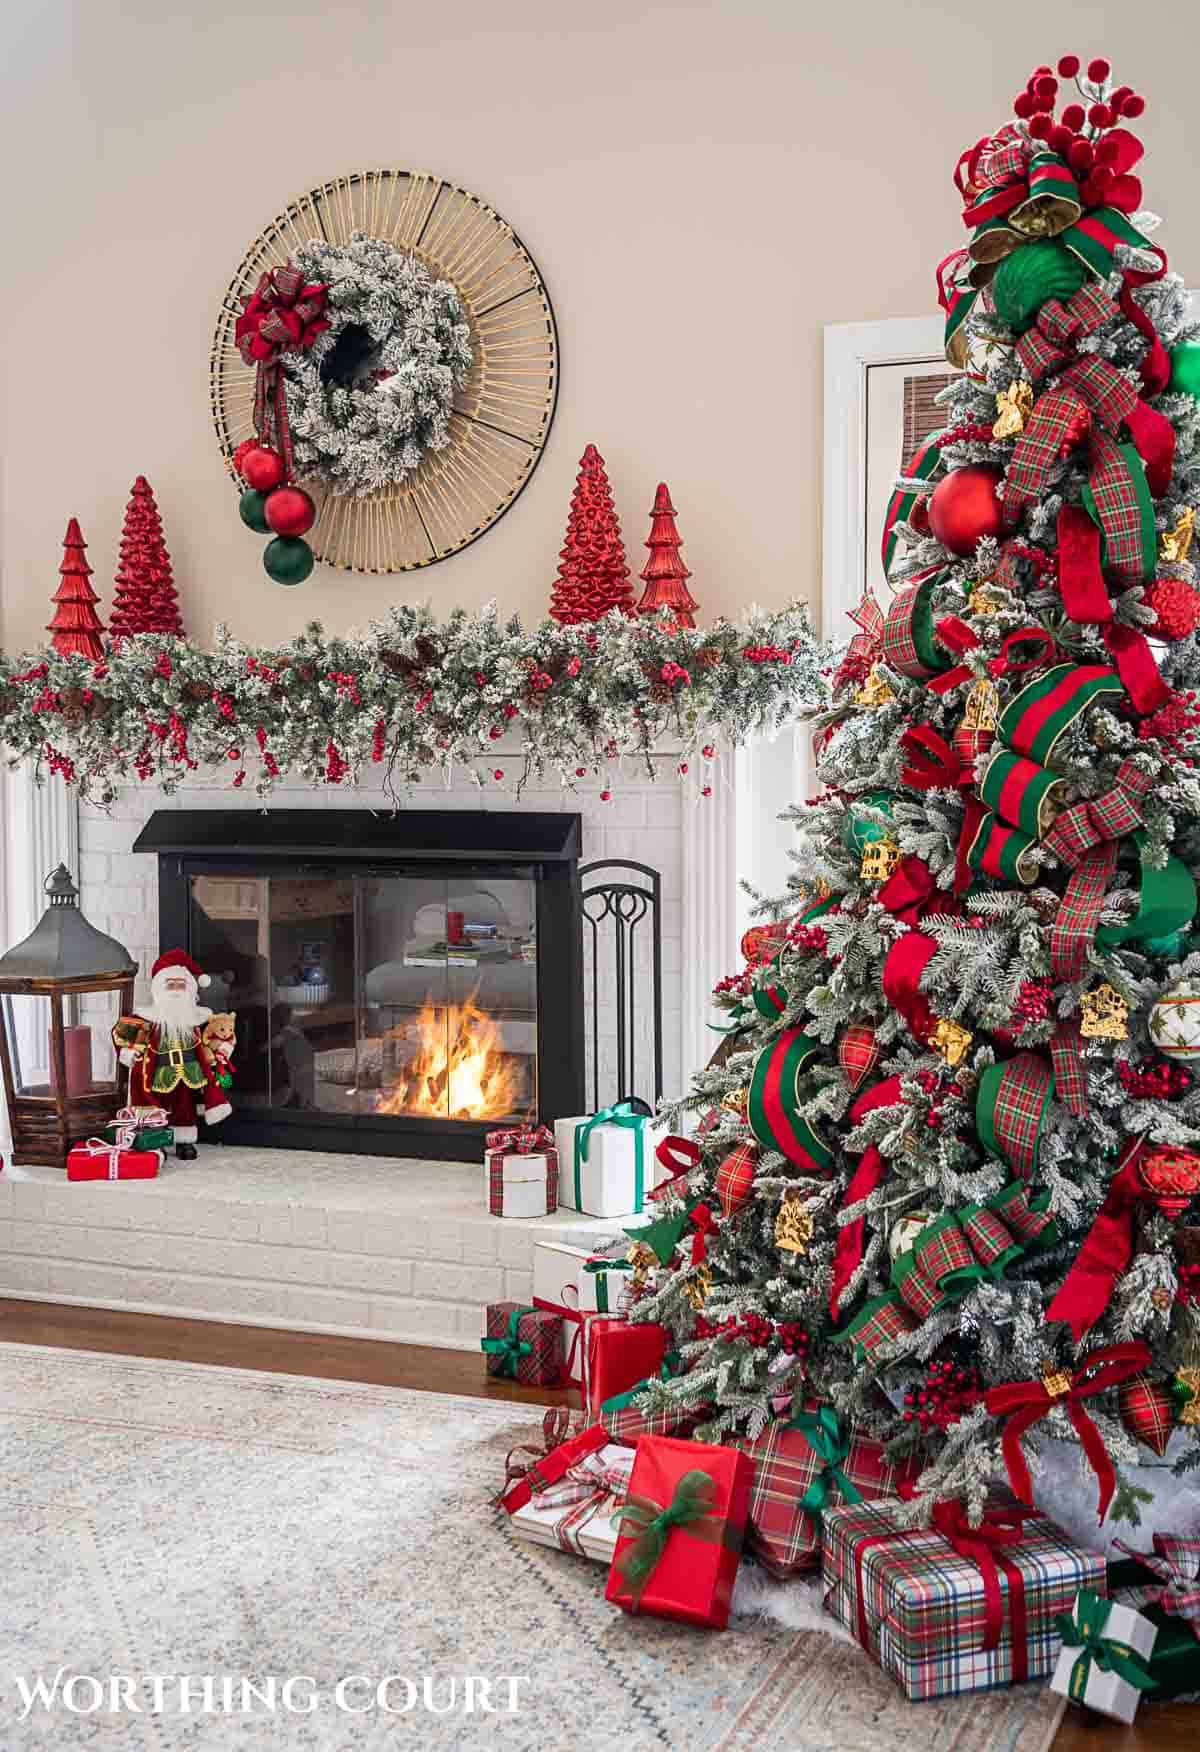 Christmas Decorating Ideas Archives - Worthing Court | DIY Home ...